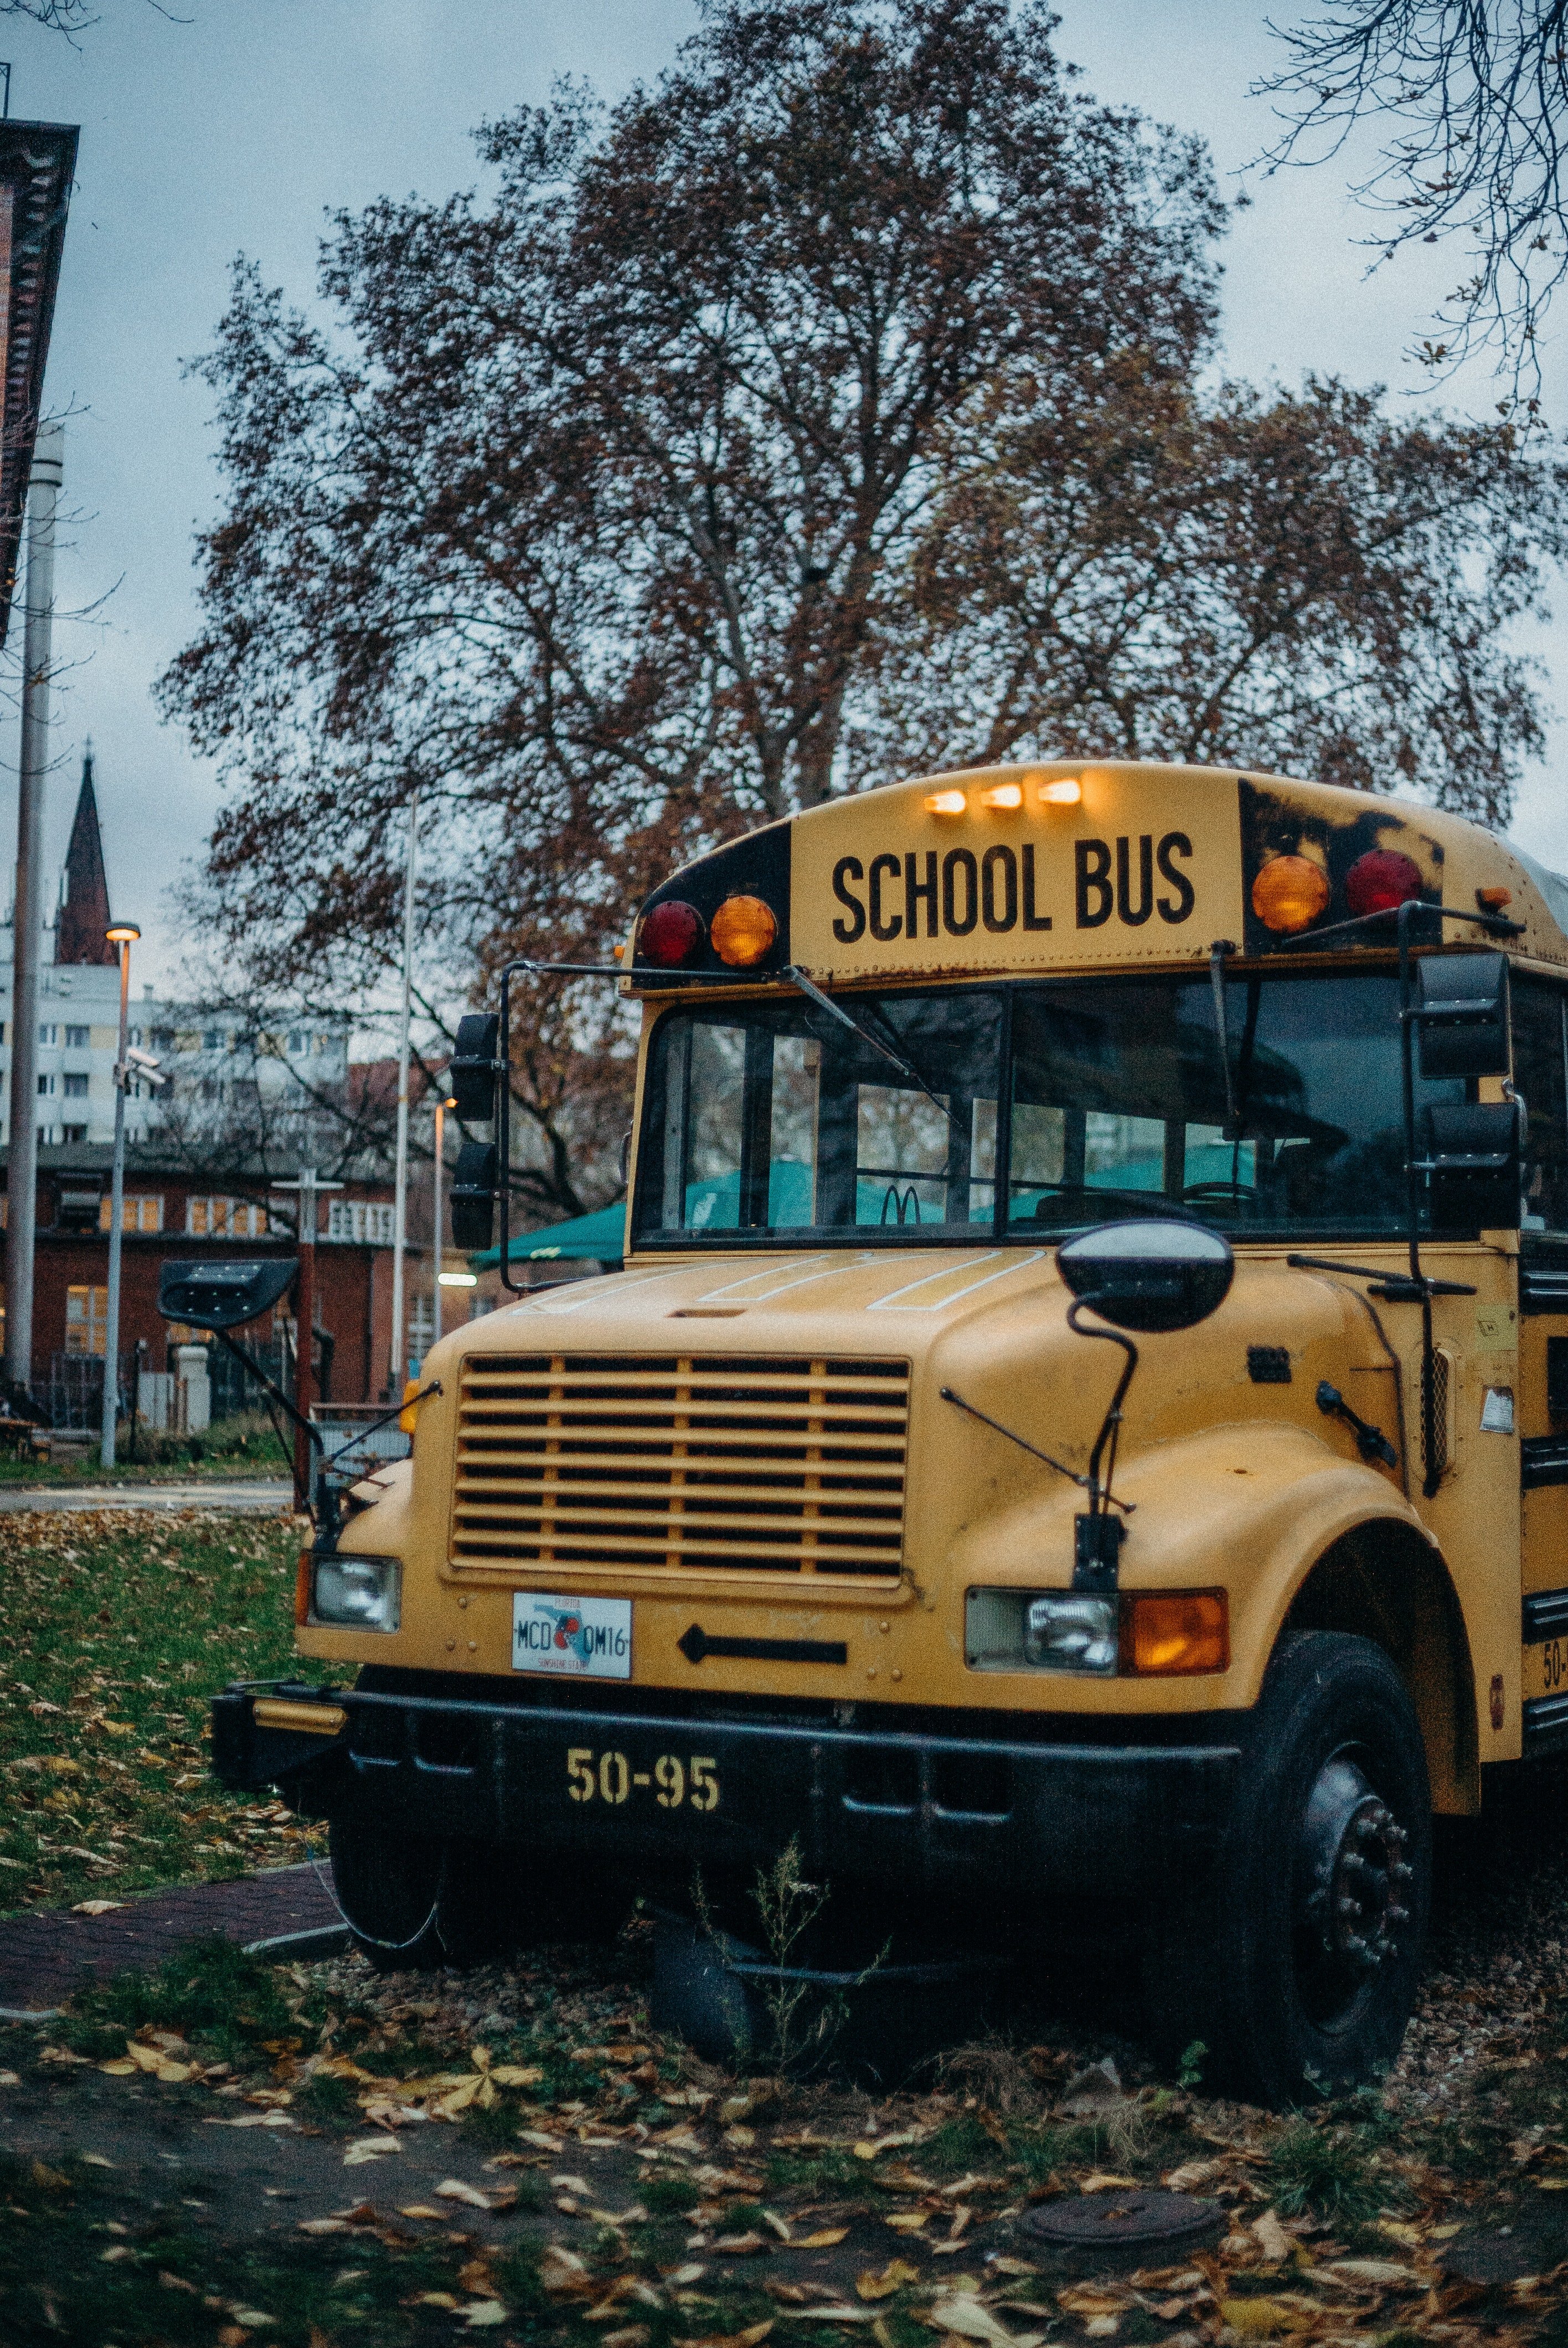 When Derek met the school bus driver, he understood why Candace was hesitant to take the bus to school. | Source: Pexels